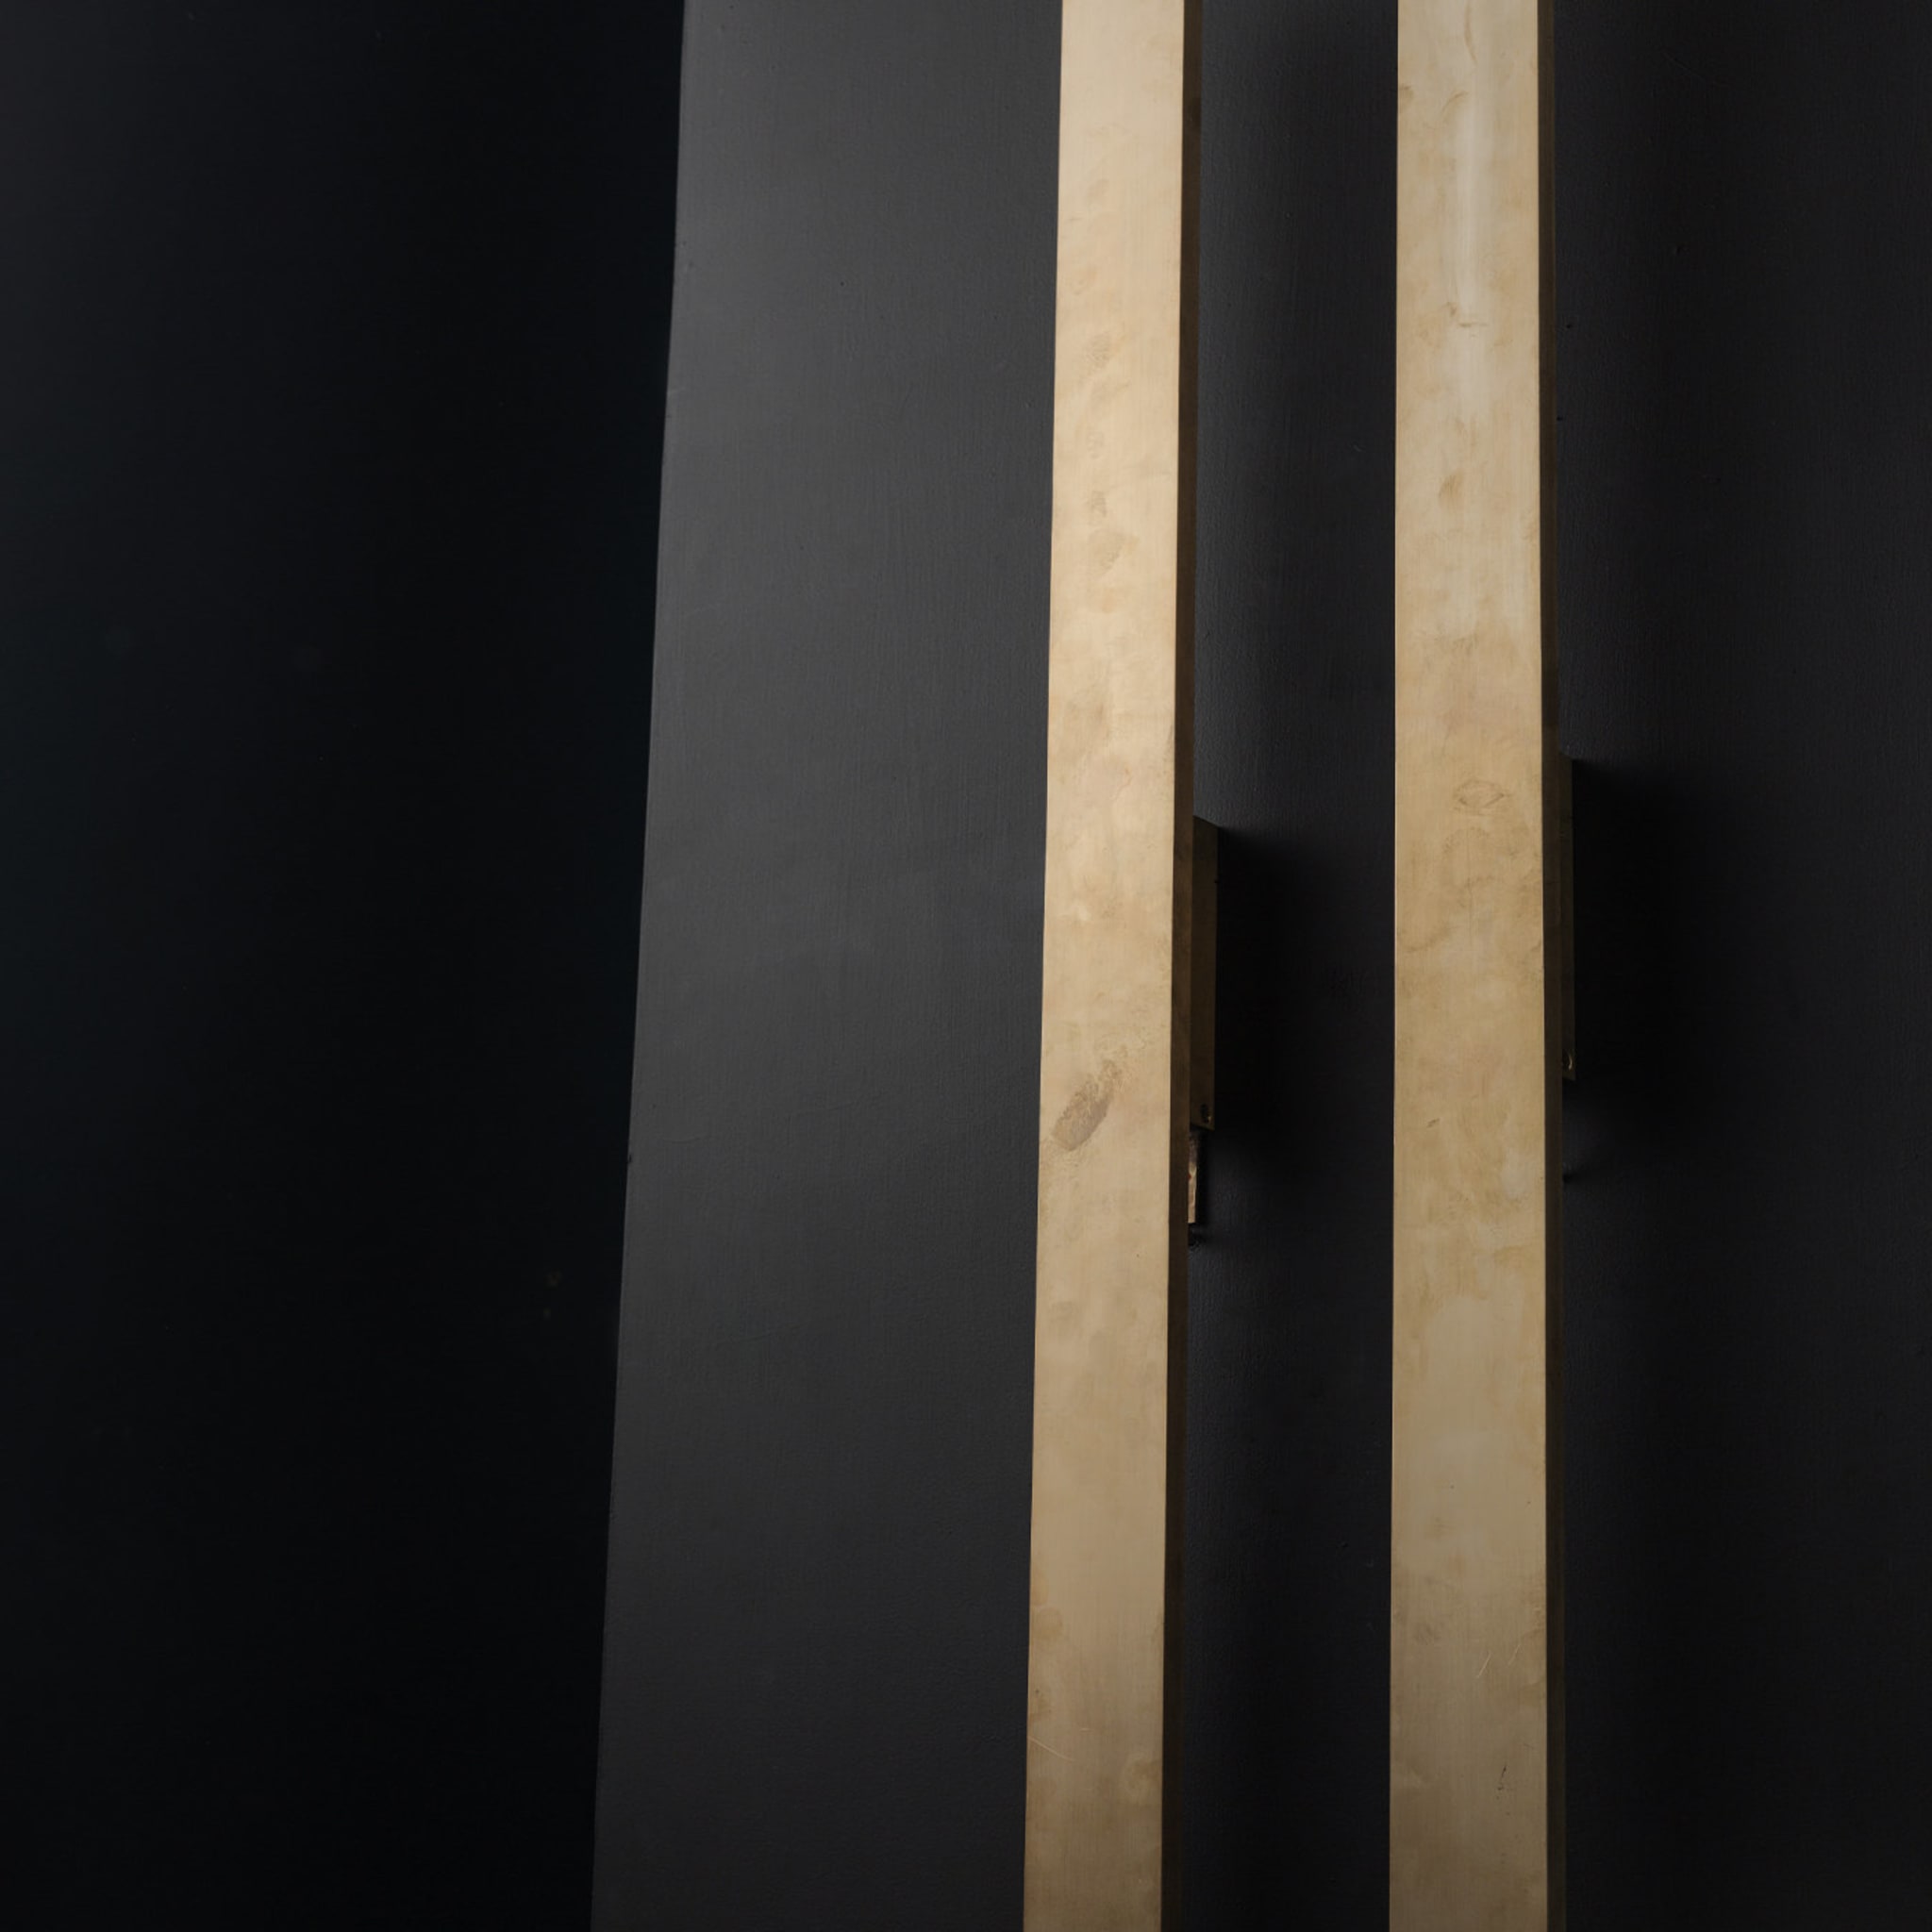 Flat Wall Lamp by Filippo Montaina - Alternative view 1